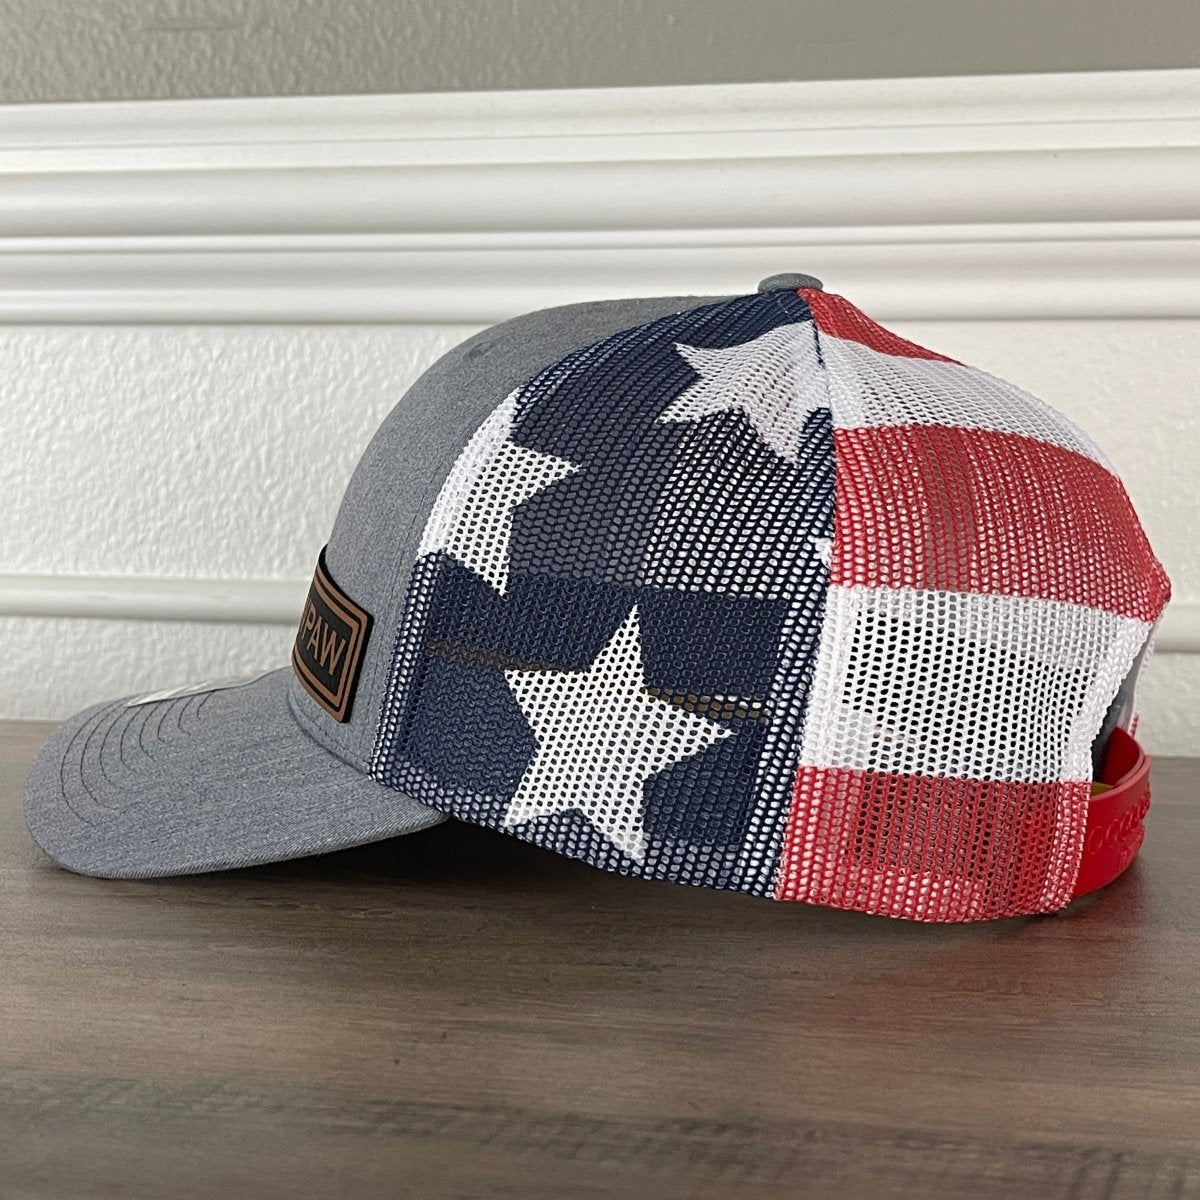 PAWPAW Side Leather Patch Hat Stars & Stripes Patch Hat - VividEditions